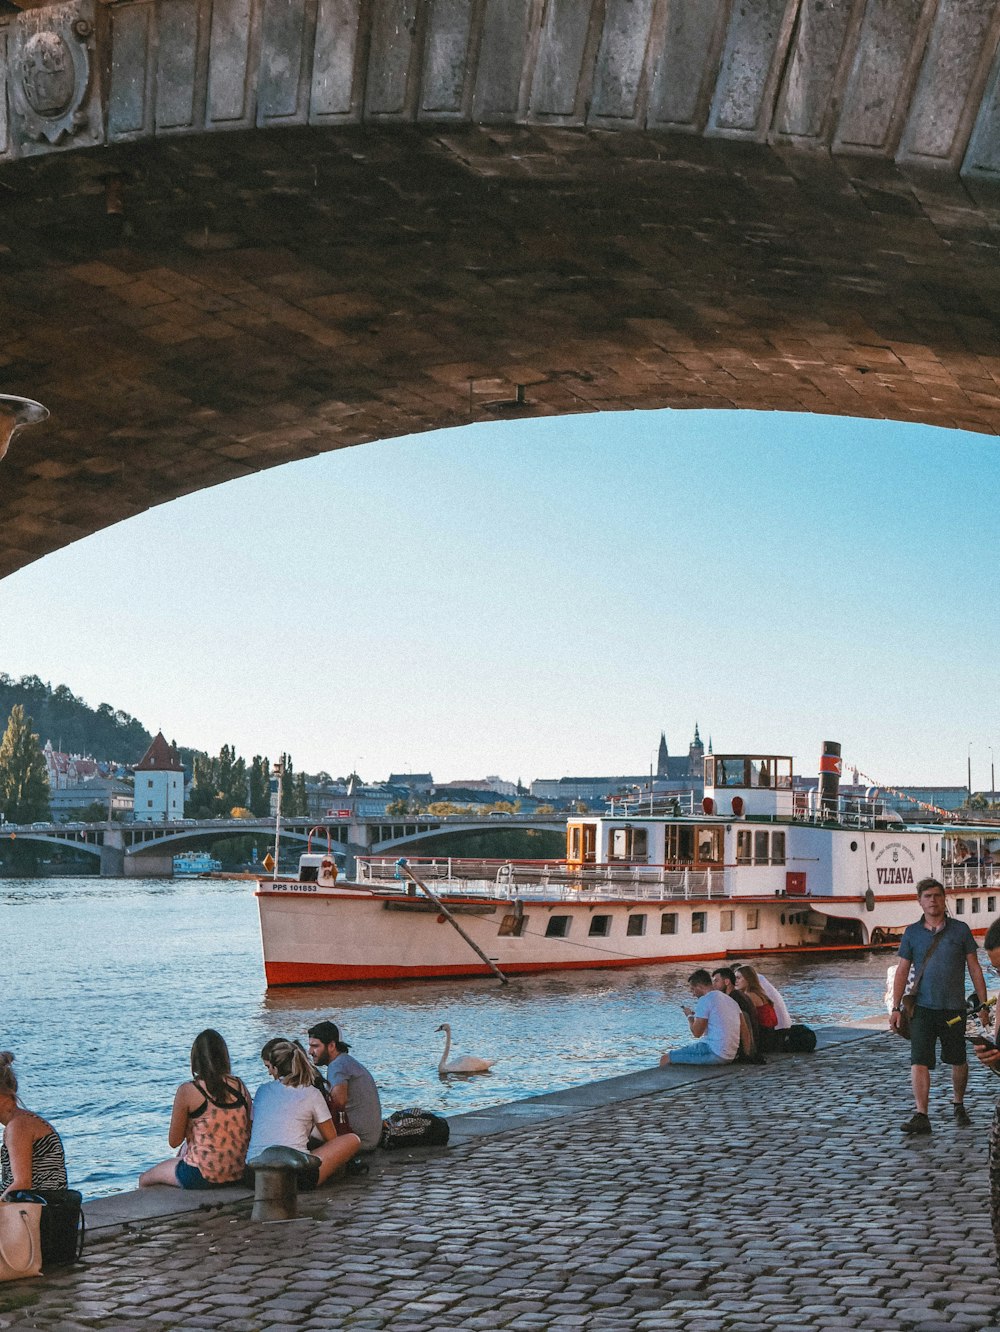 people on boat under arch bridge during daytime